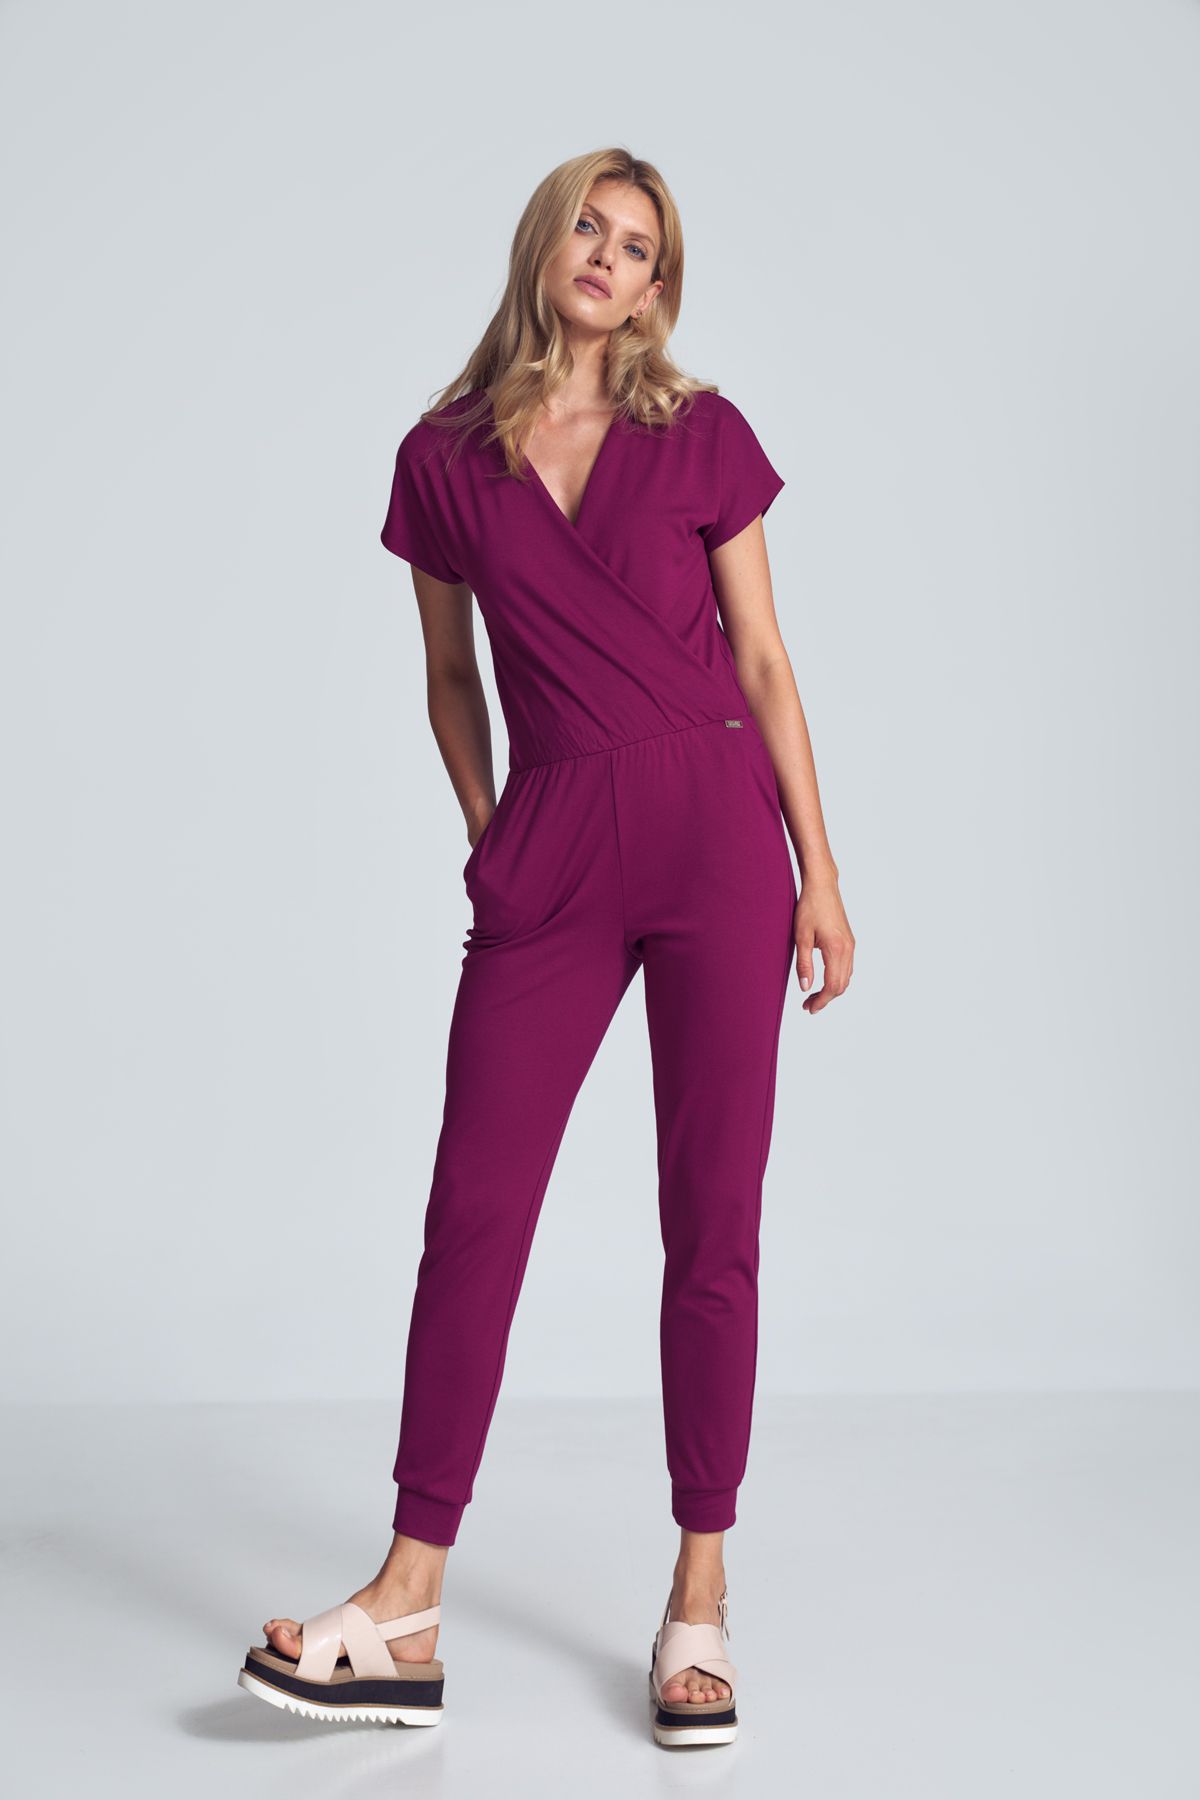 Fuchsia jumpsuit with a sporty cut, wrinkled neckline, an elastic band sewn at the waist, narrow legs finished with a welt. Pockets in the side seams.